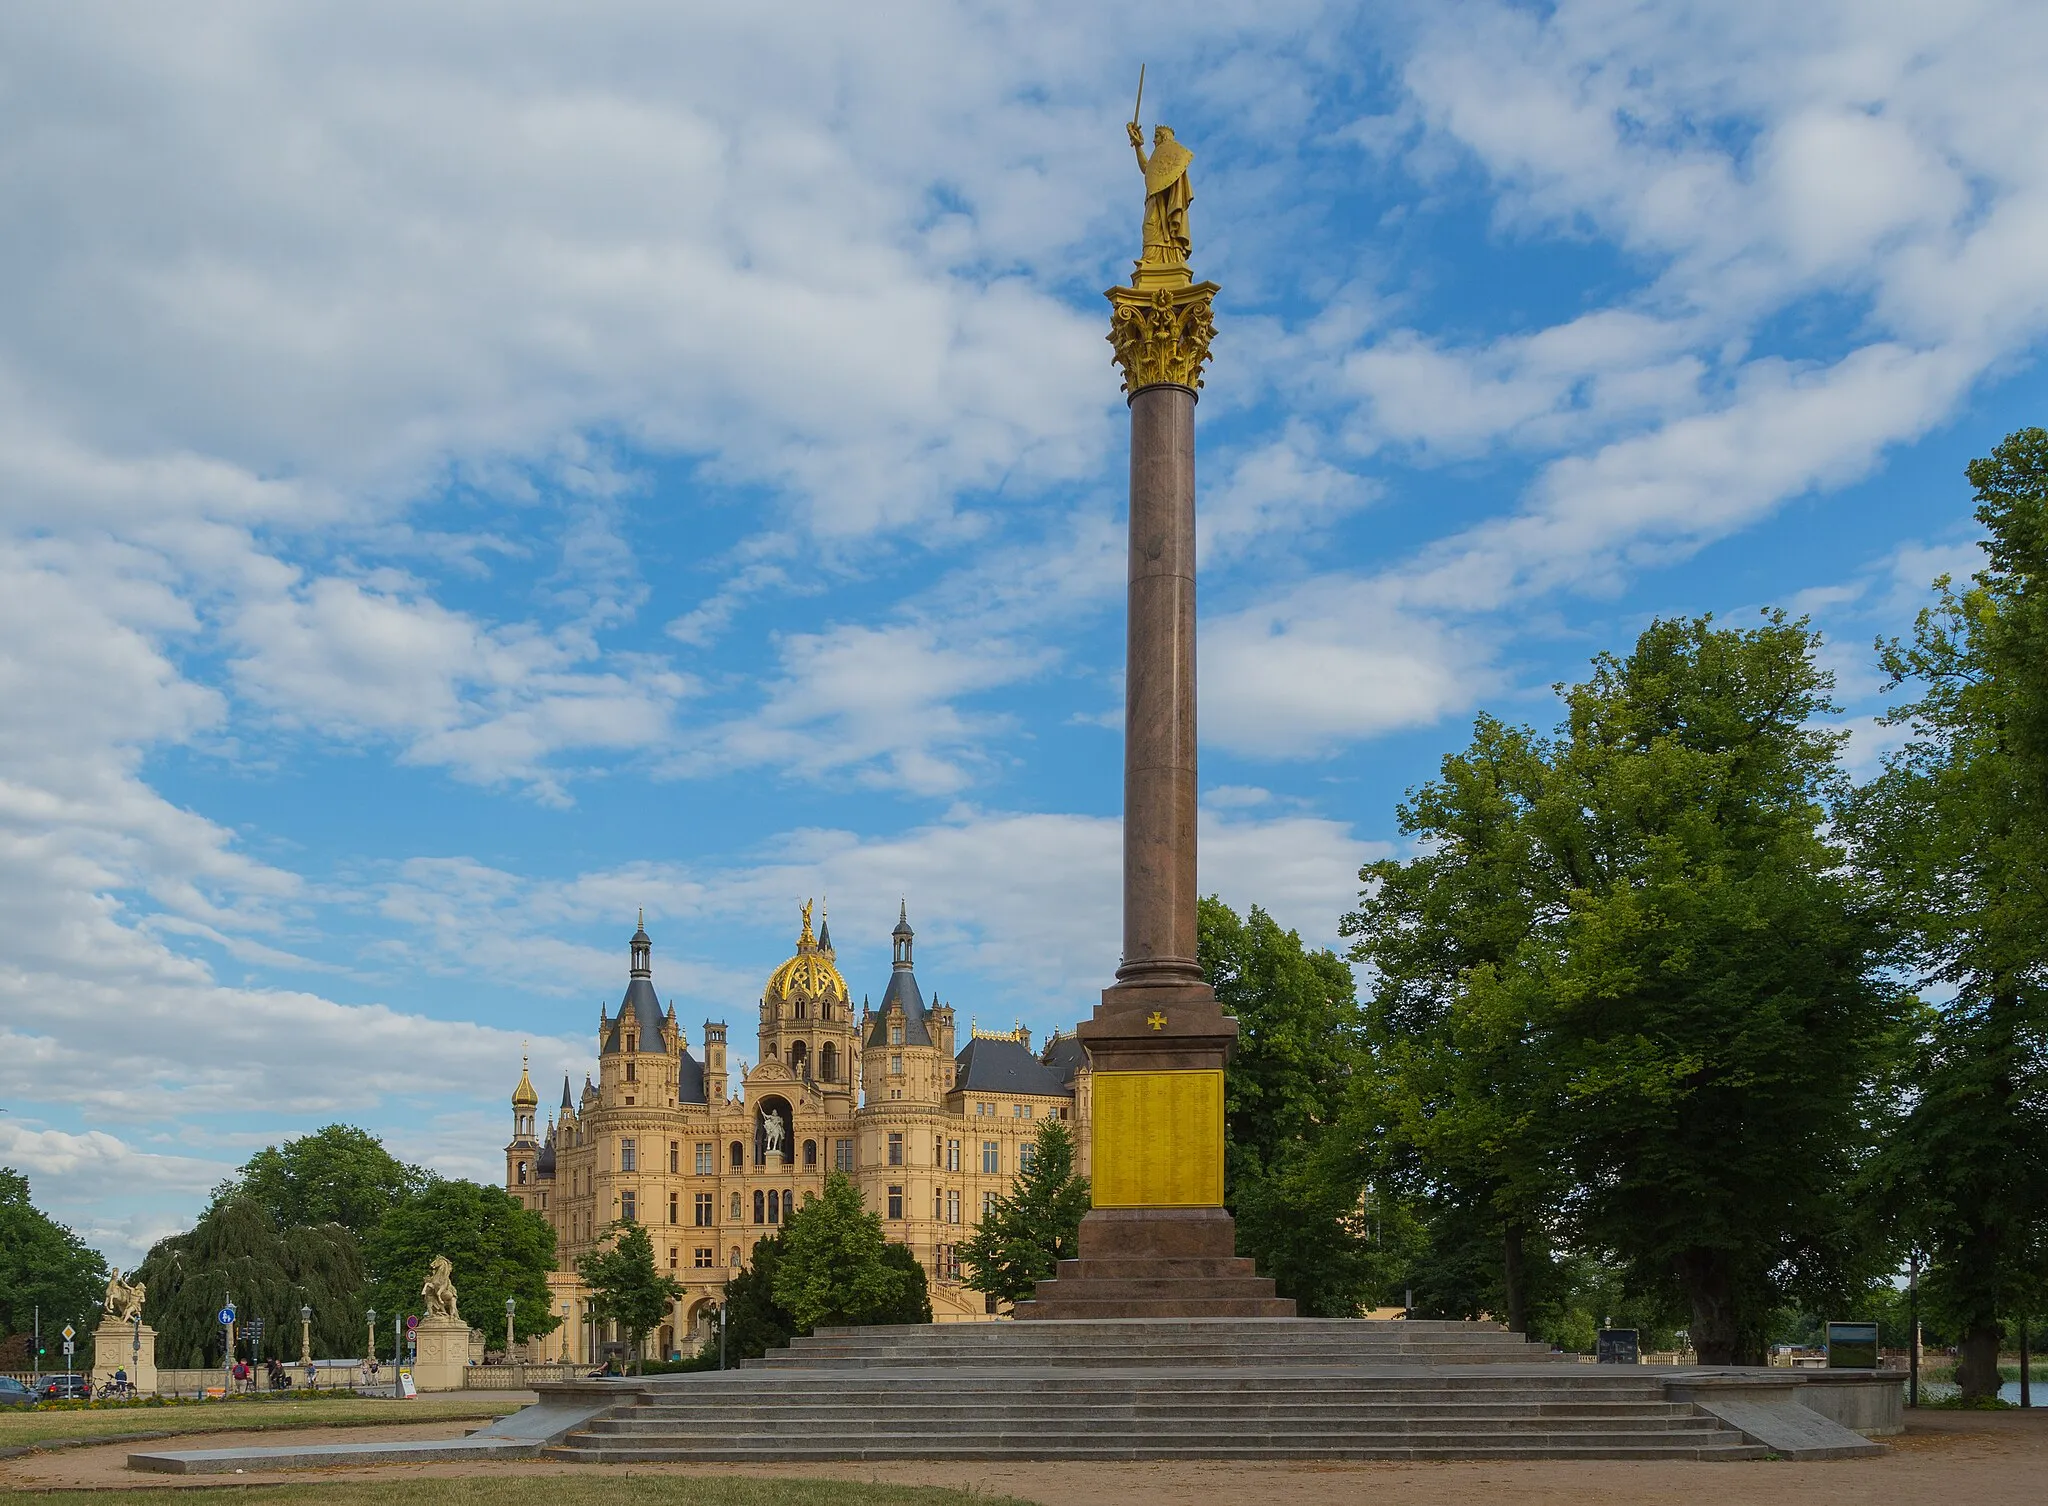 Photo showing: Schwerin Victory Column and Schwerin Castle‎ in Schwerin, Mecklenburg-Vorpommern, Germany. Both are listed cultural heritage monuments.